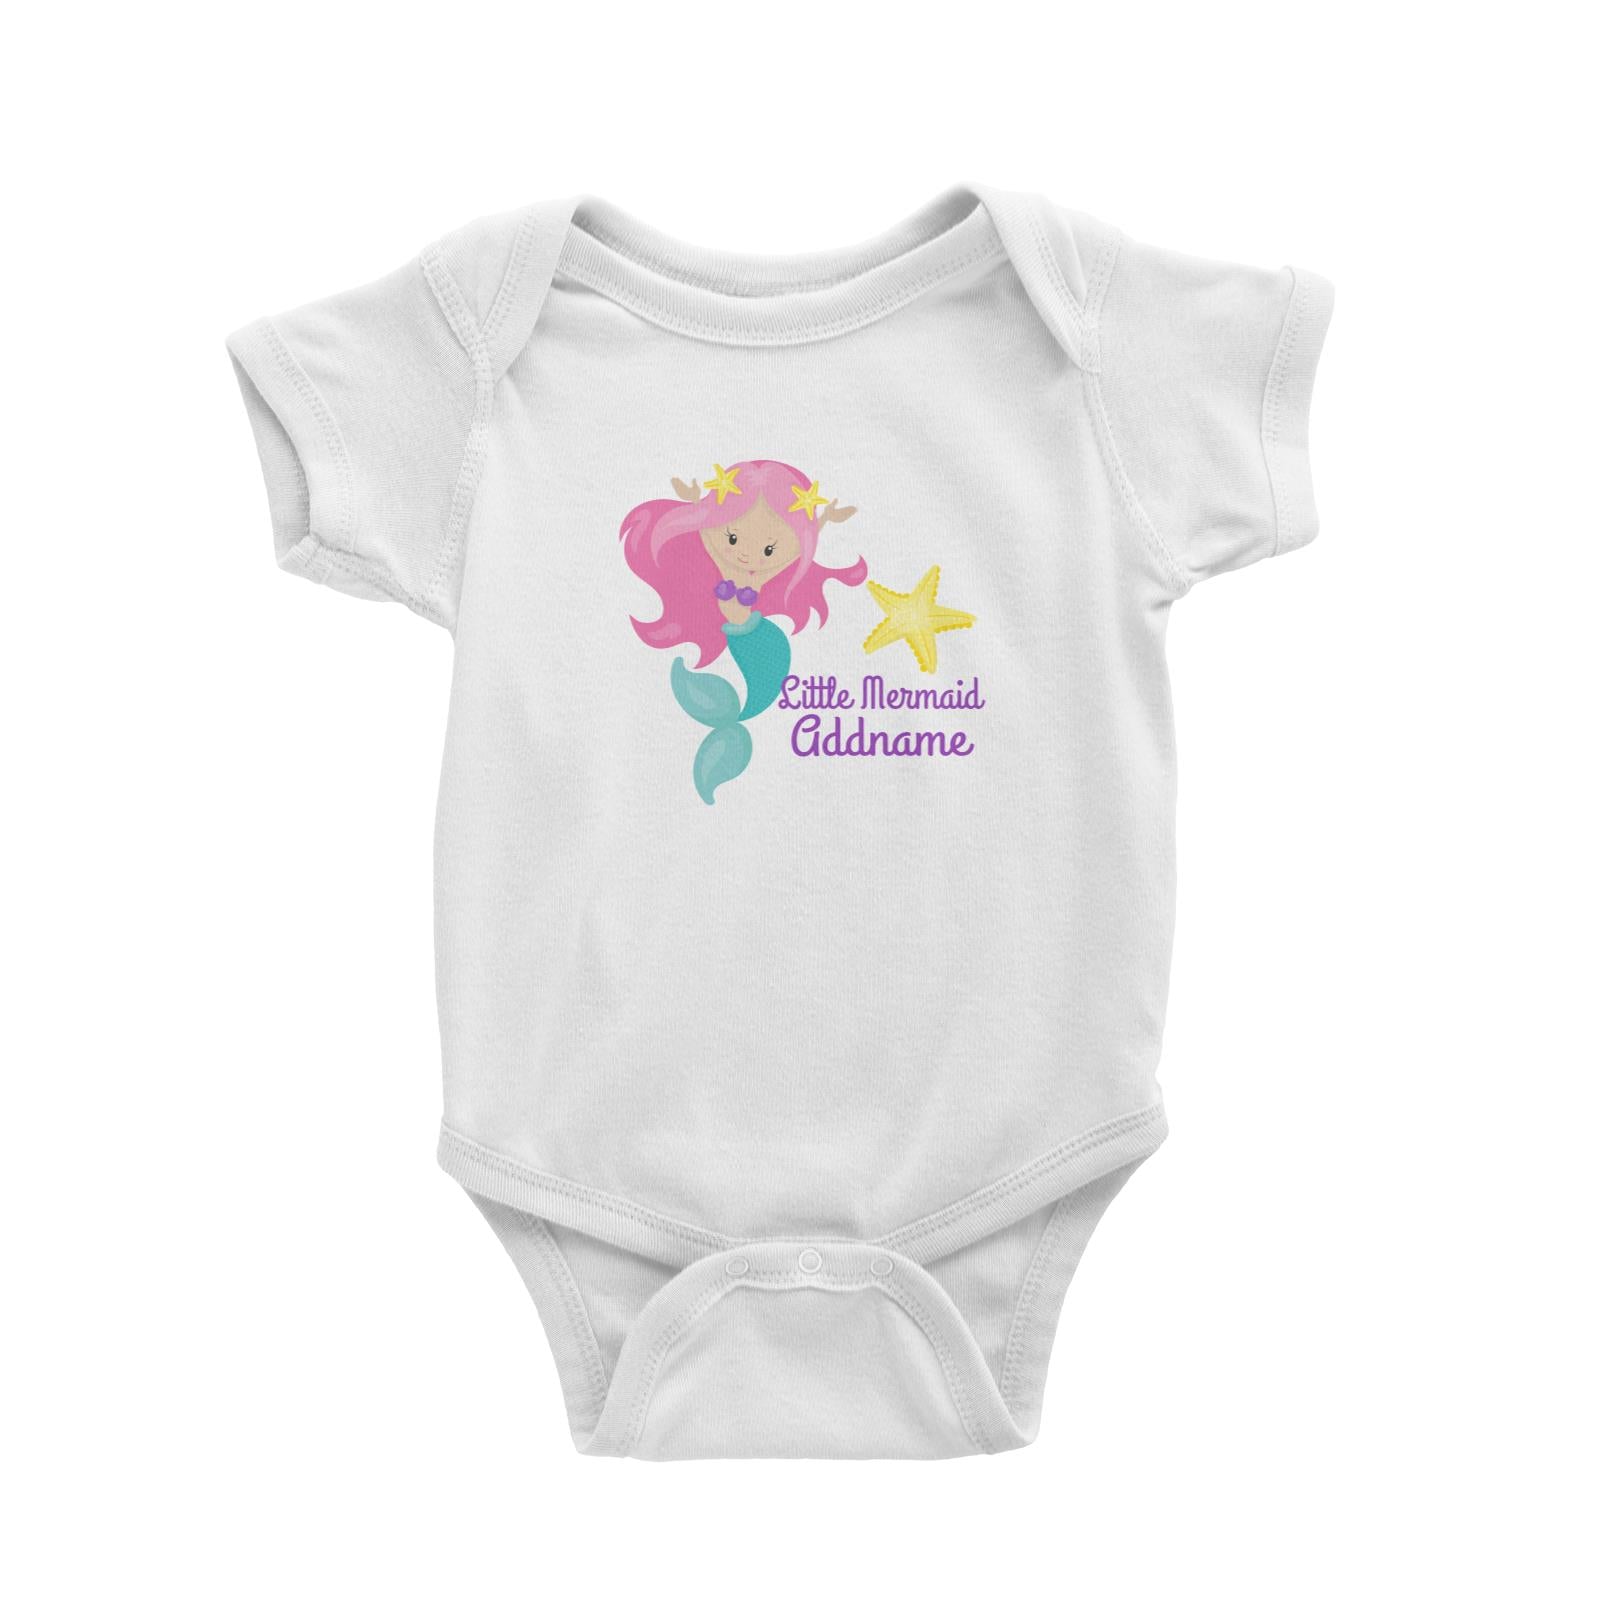 Little Mermaid Celebrating with Starfish Addname White Baby Romper